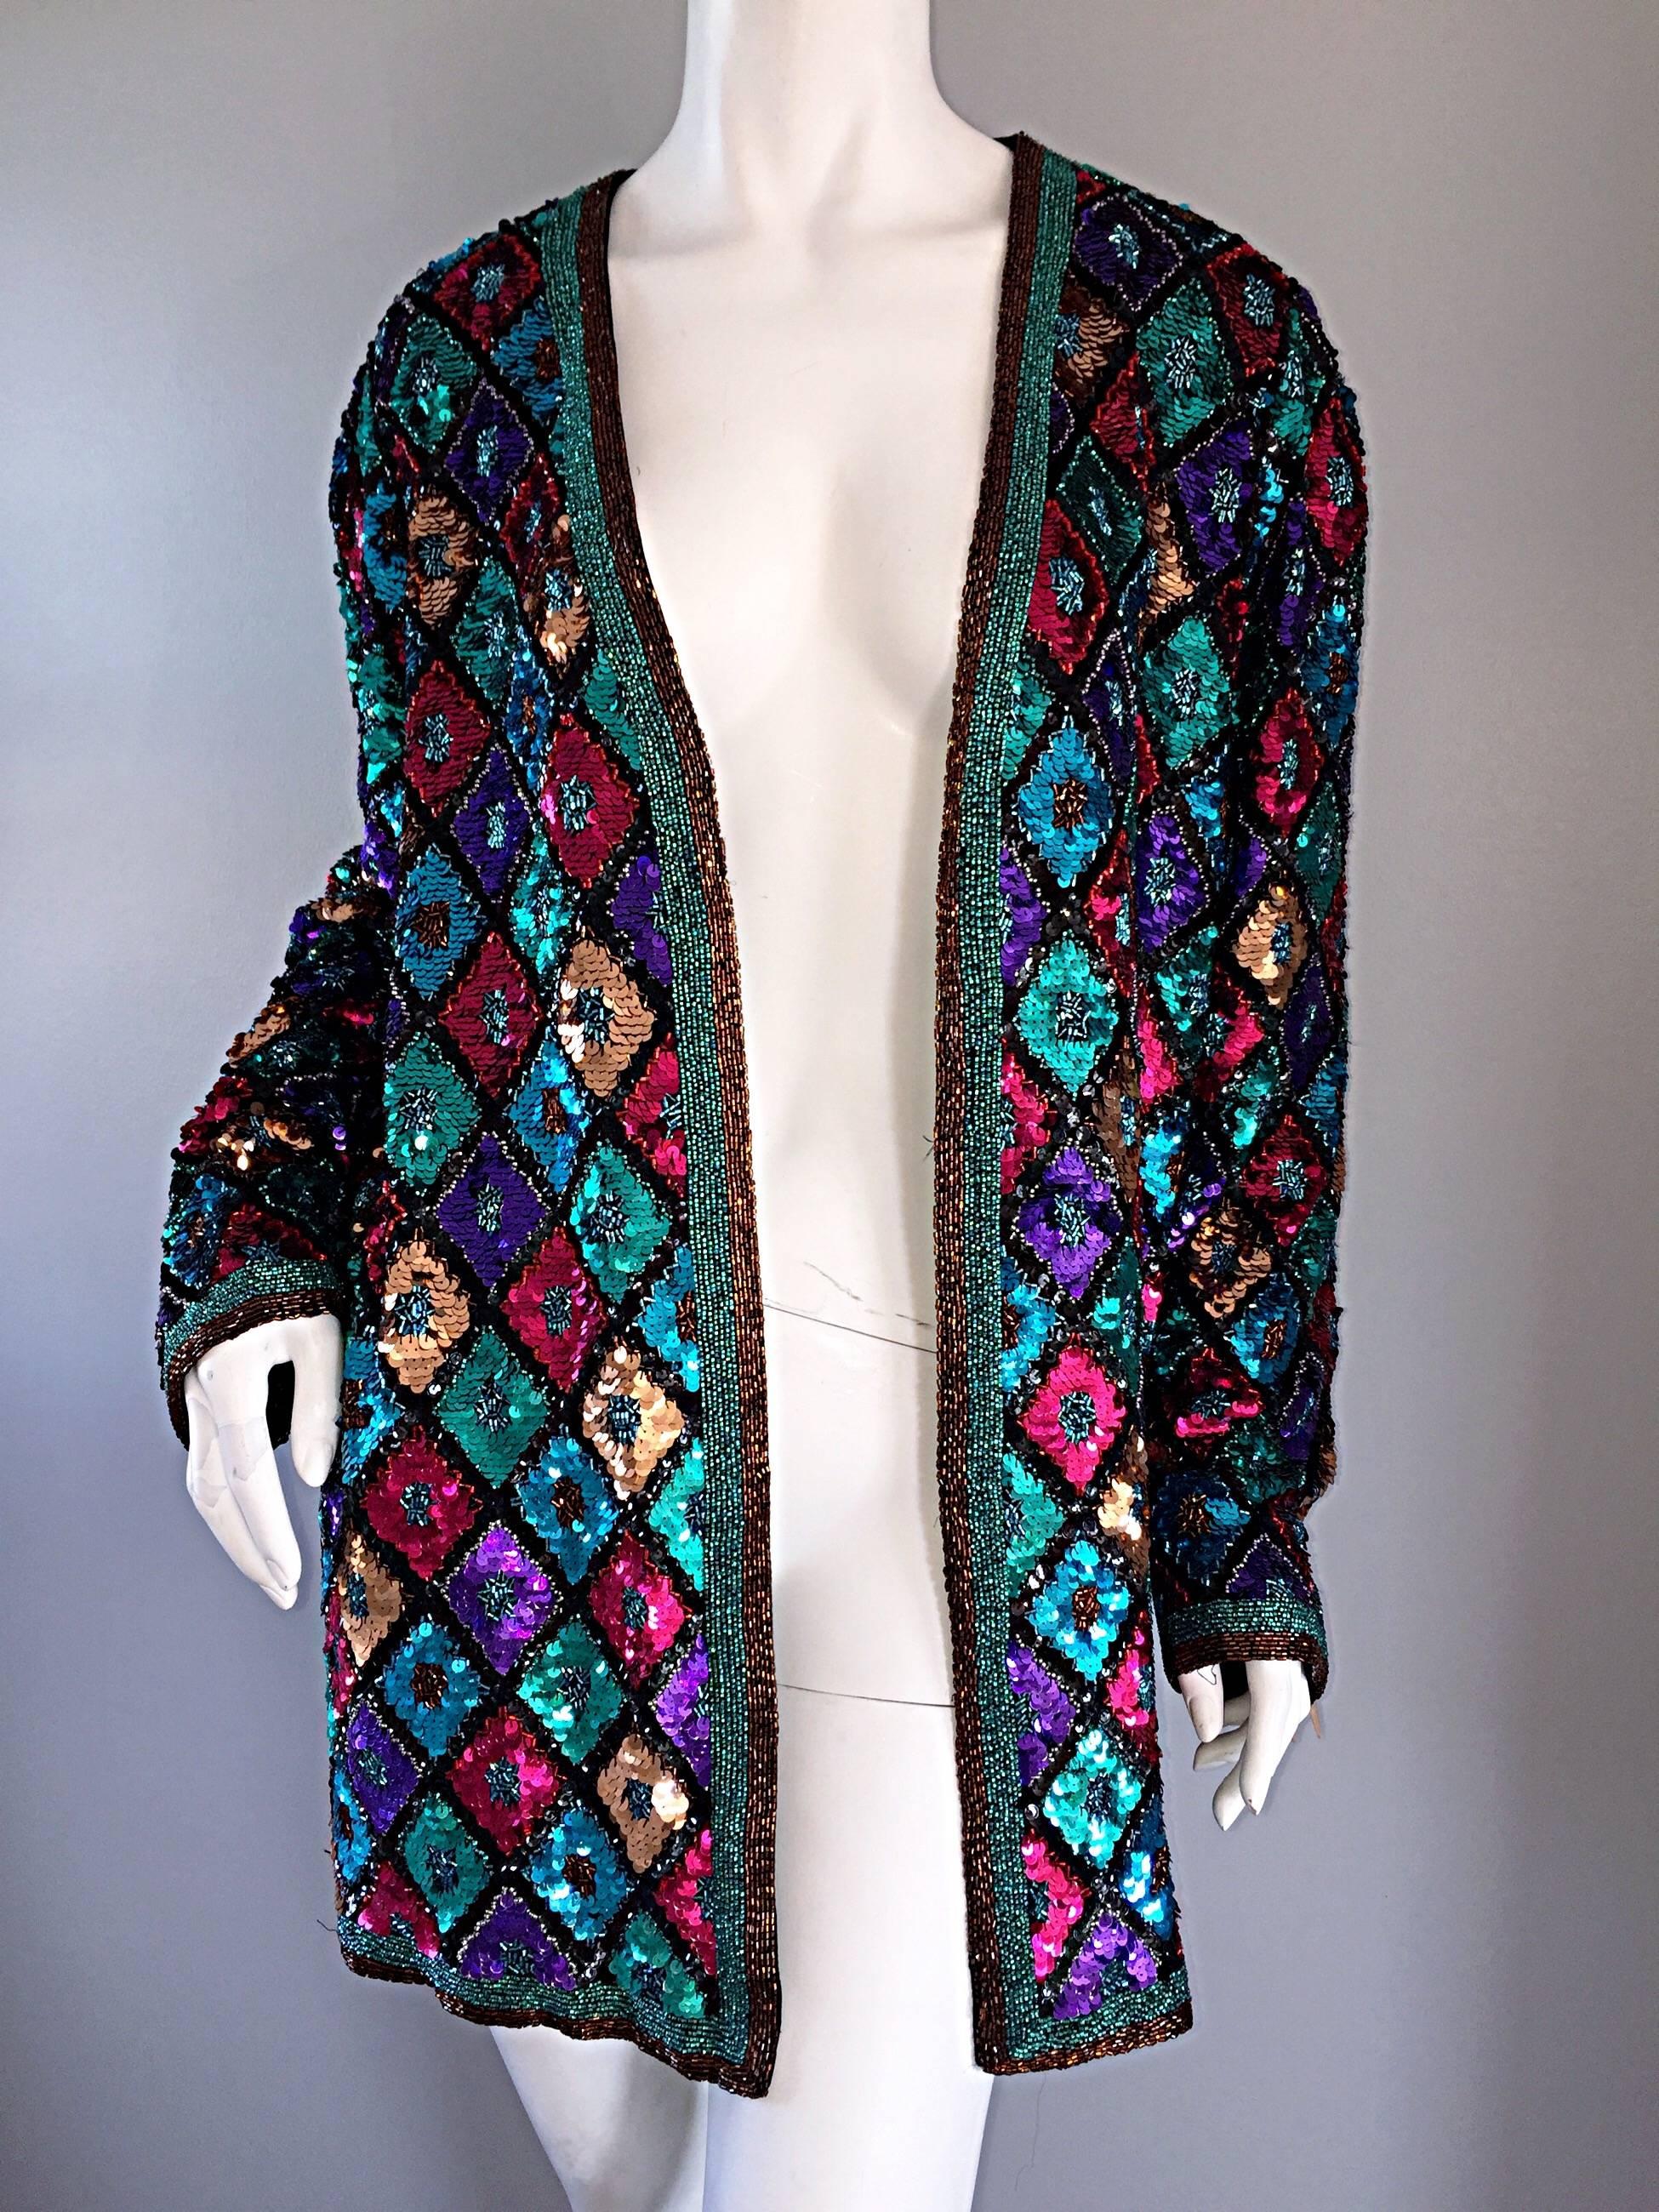 Vintage Oleg Cassini Sequined & Beaded Colorful Slouchy ' Stained Glass ' Jacket 2